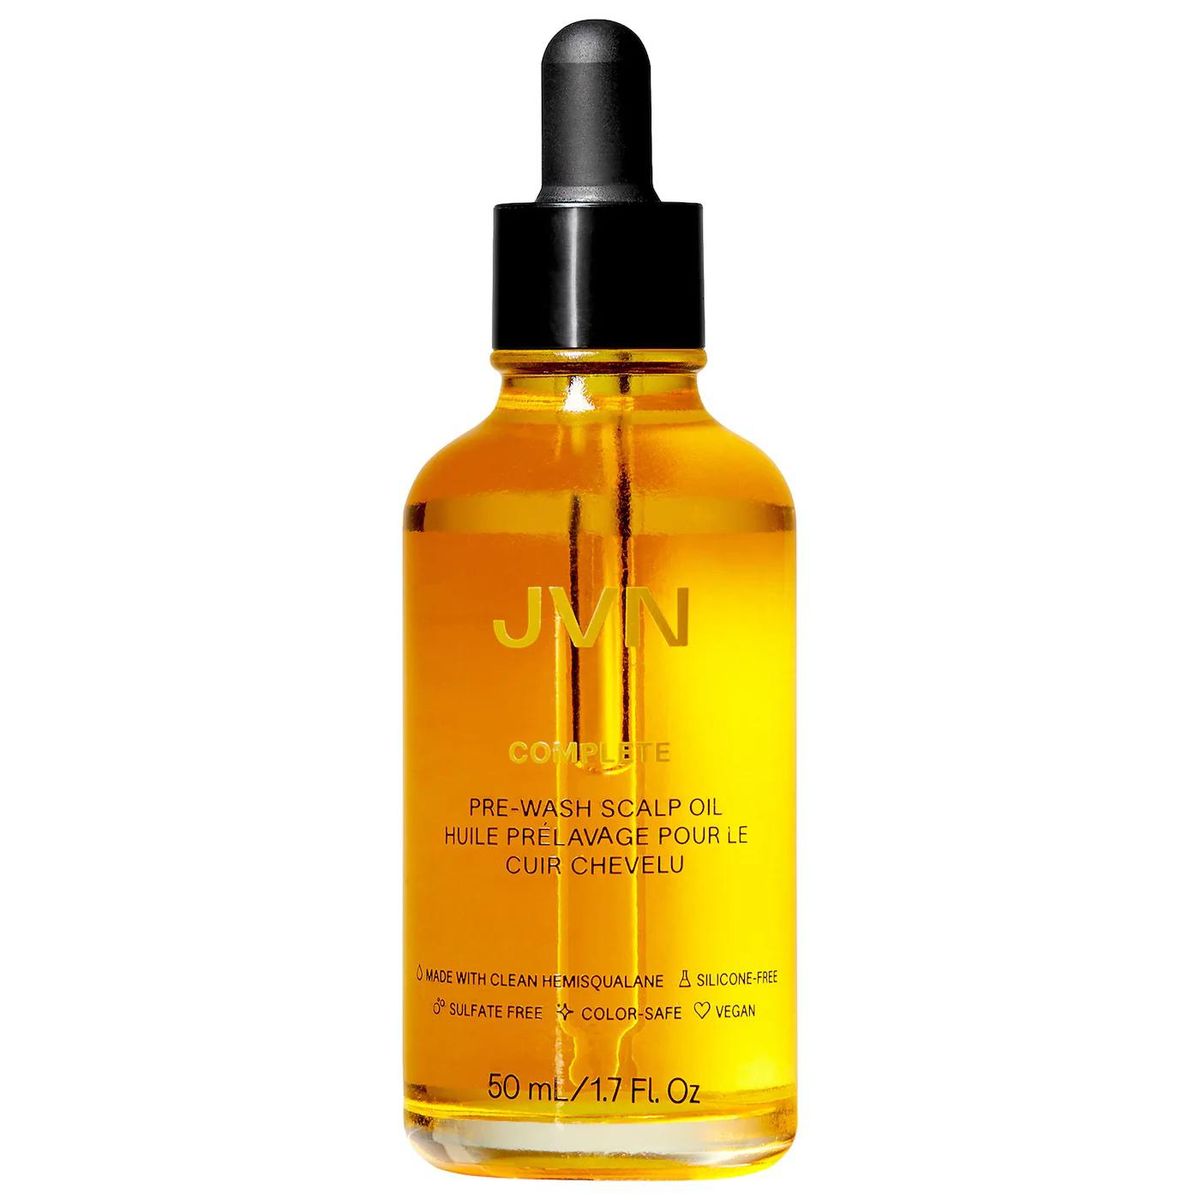 Complete Pre-Wash Scalp and Hair Treatment Oil